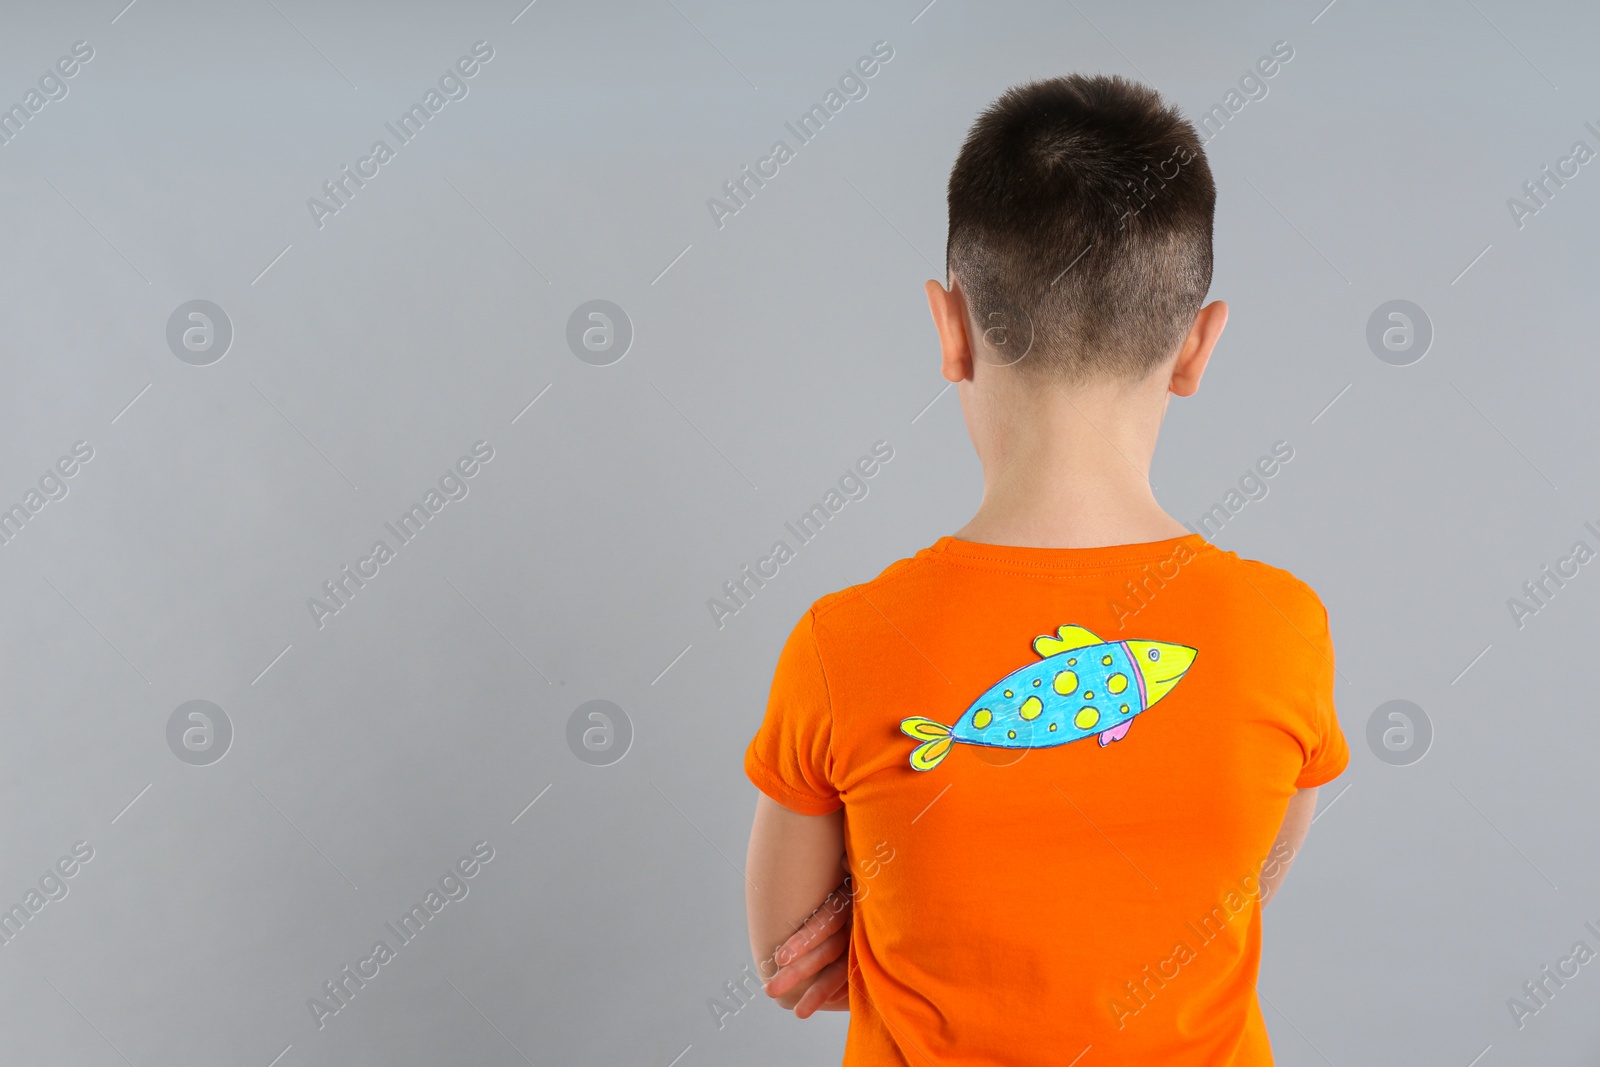 Photo of Preteen boy with paper fish on back against light grey background, space for text. April fool's day